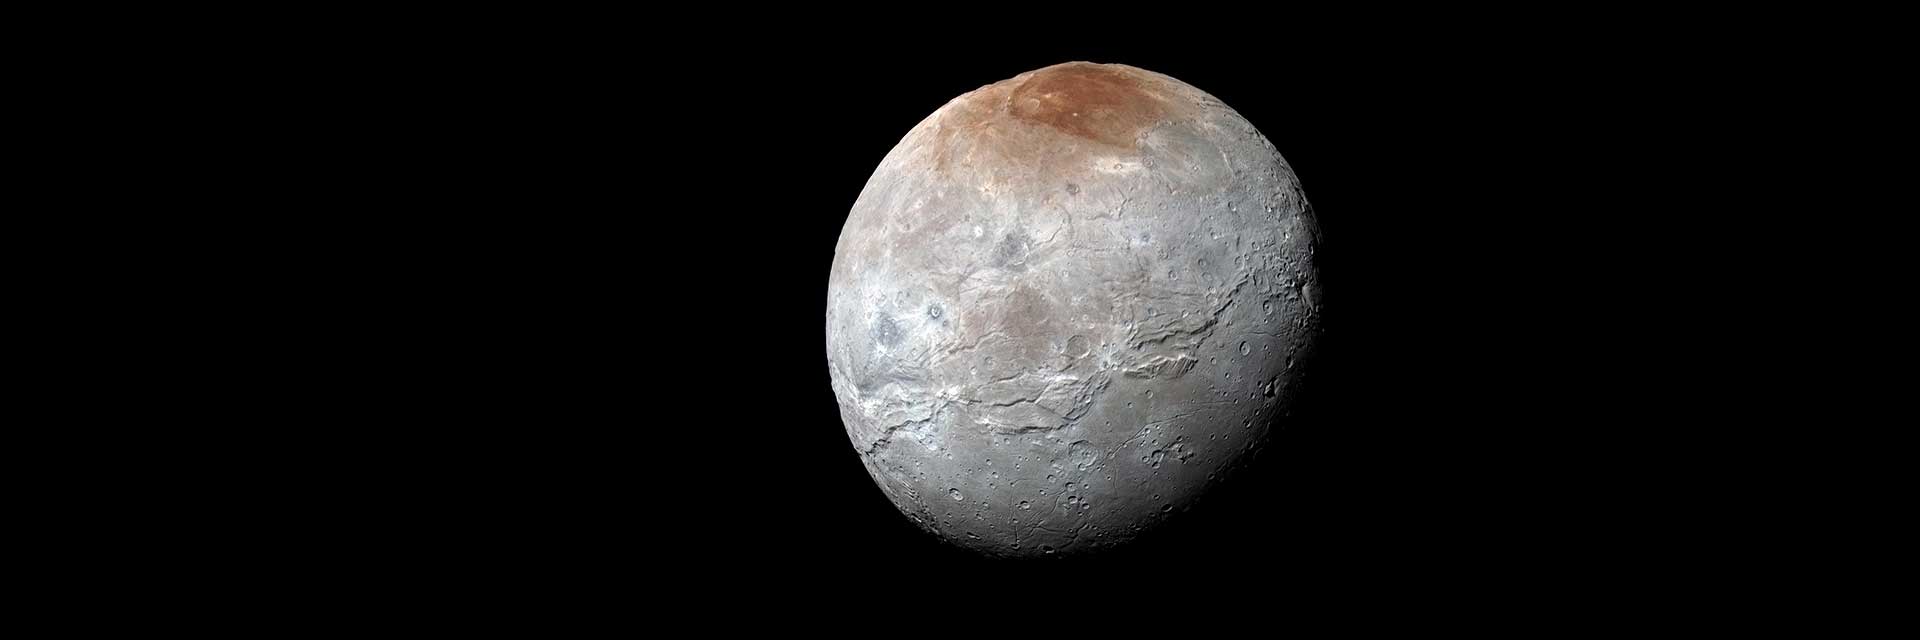 A full glove view of Pluton's moon, Charon. The moon is gray with a reddish cap.